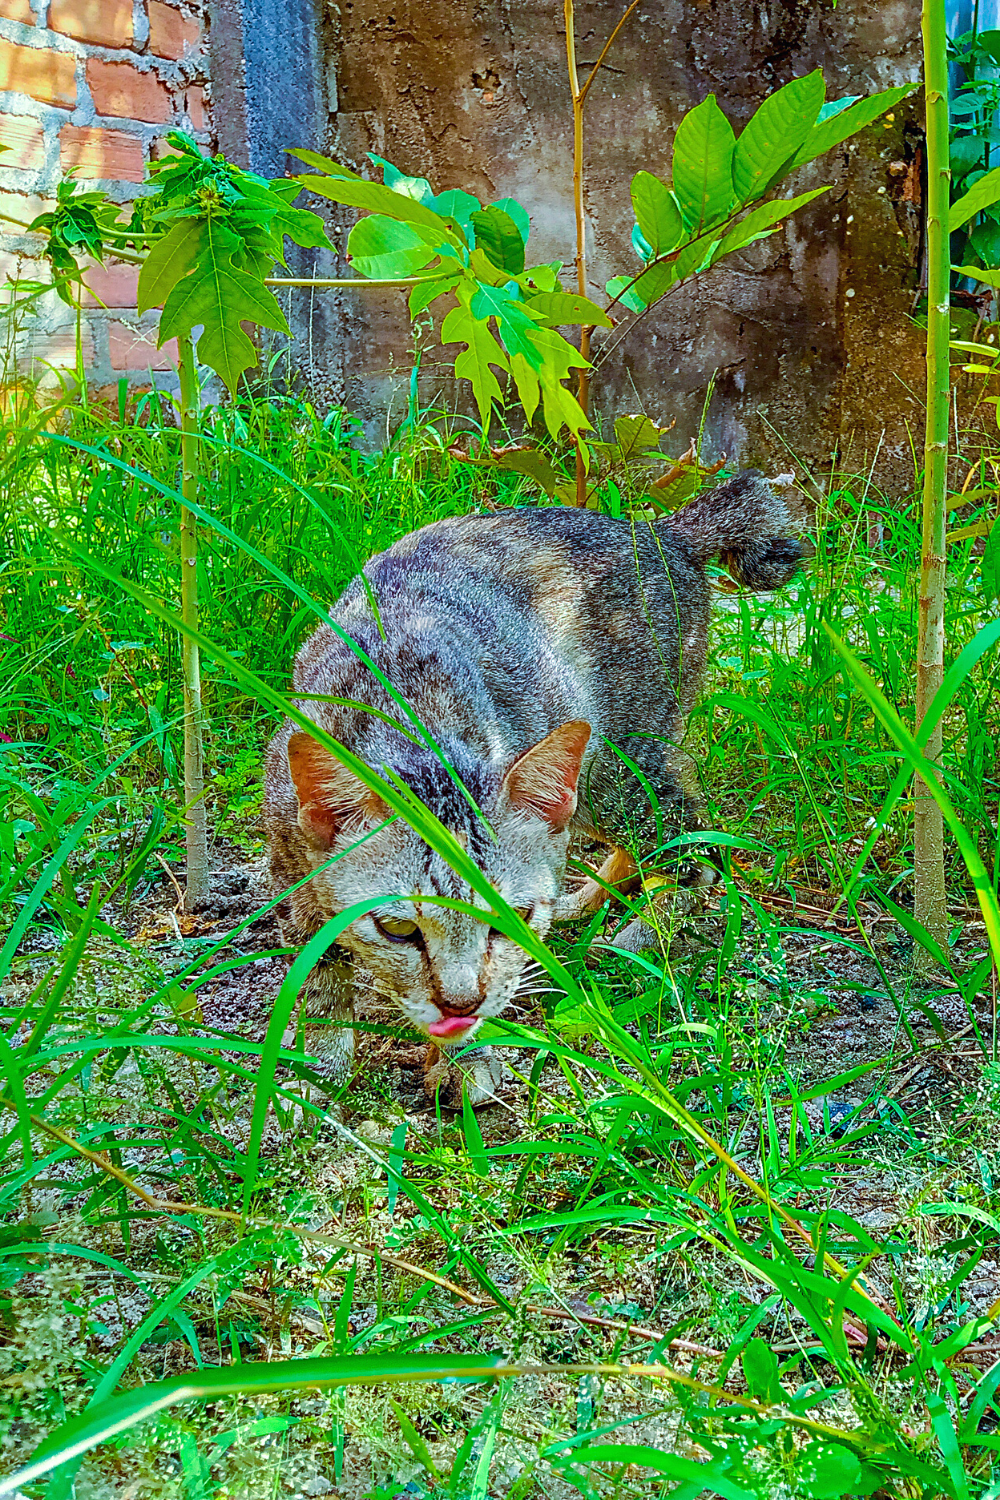 Previously domesticated cats who have become feral hunt small prey in the yard